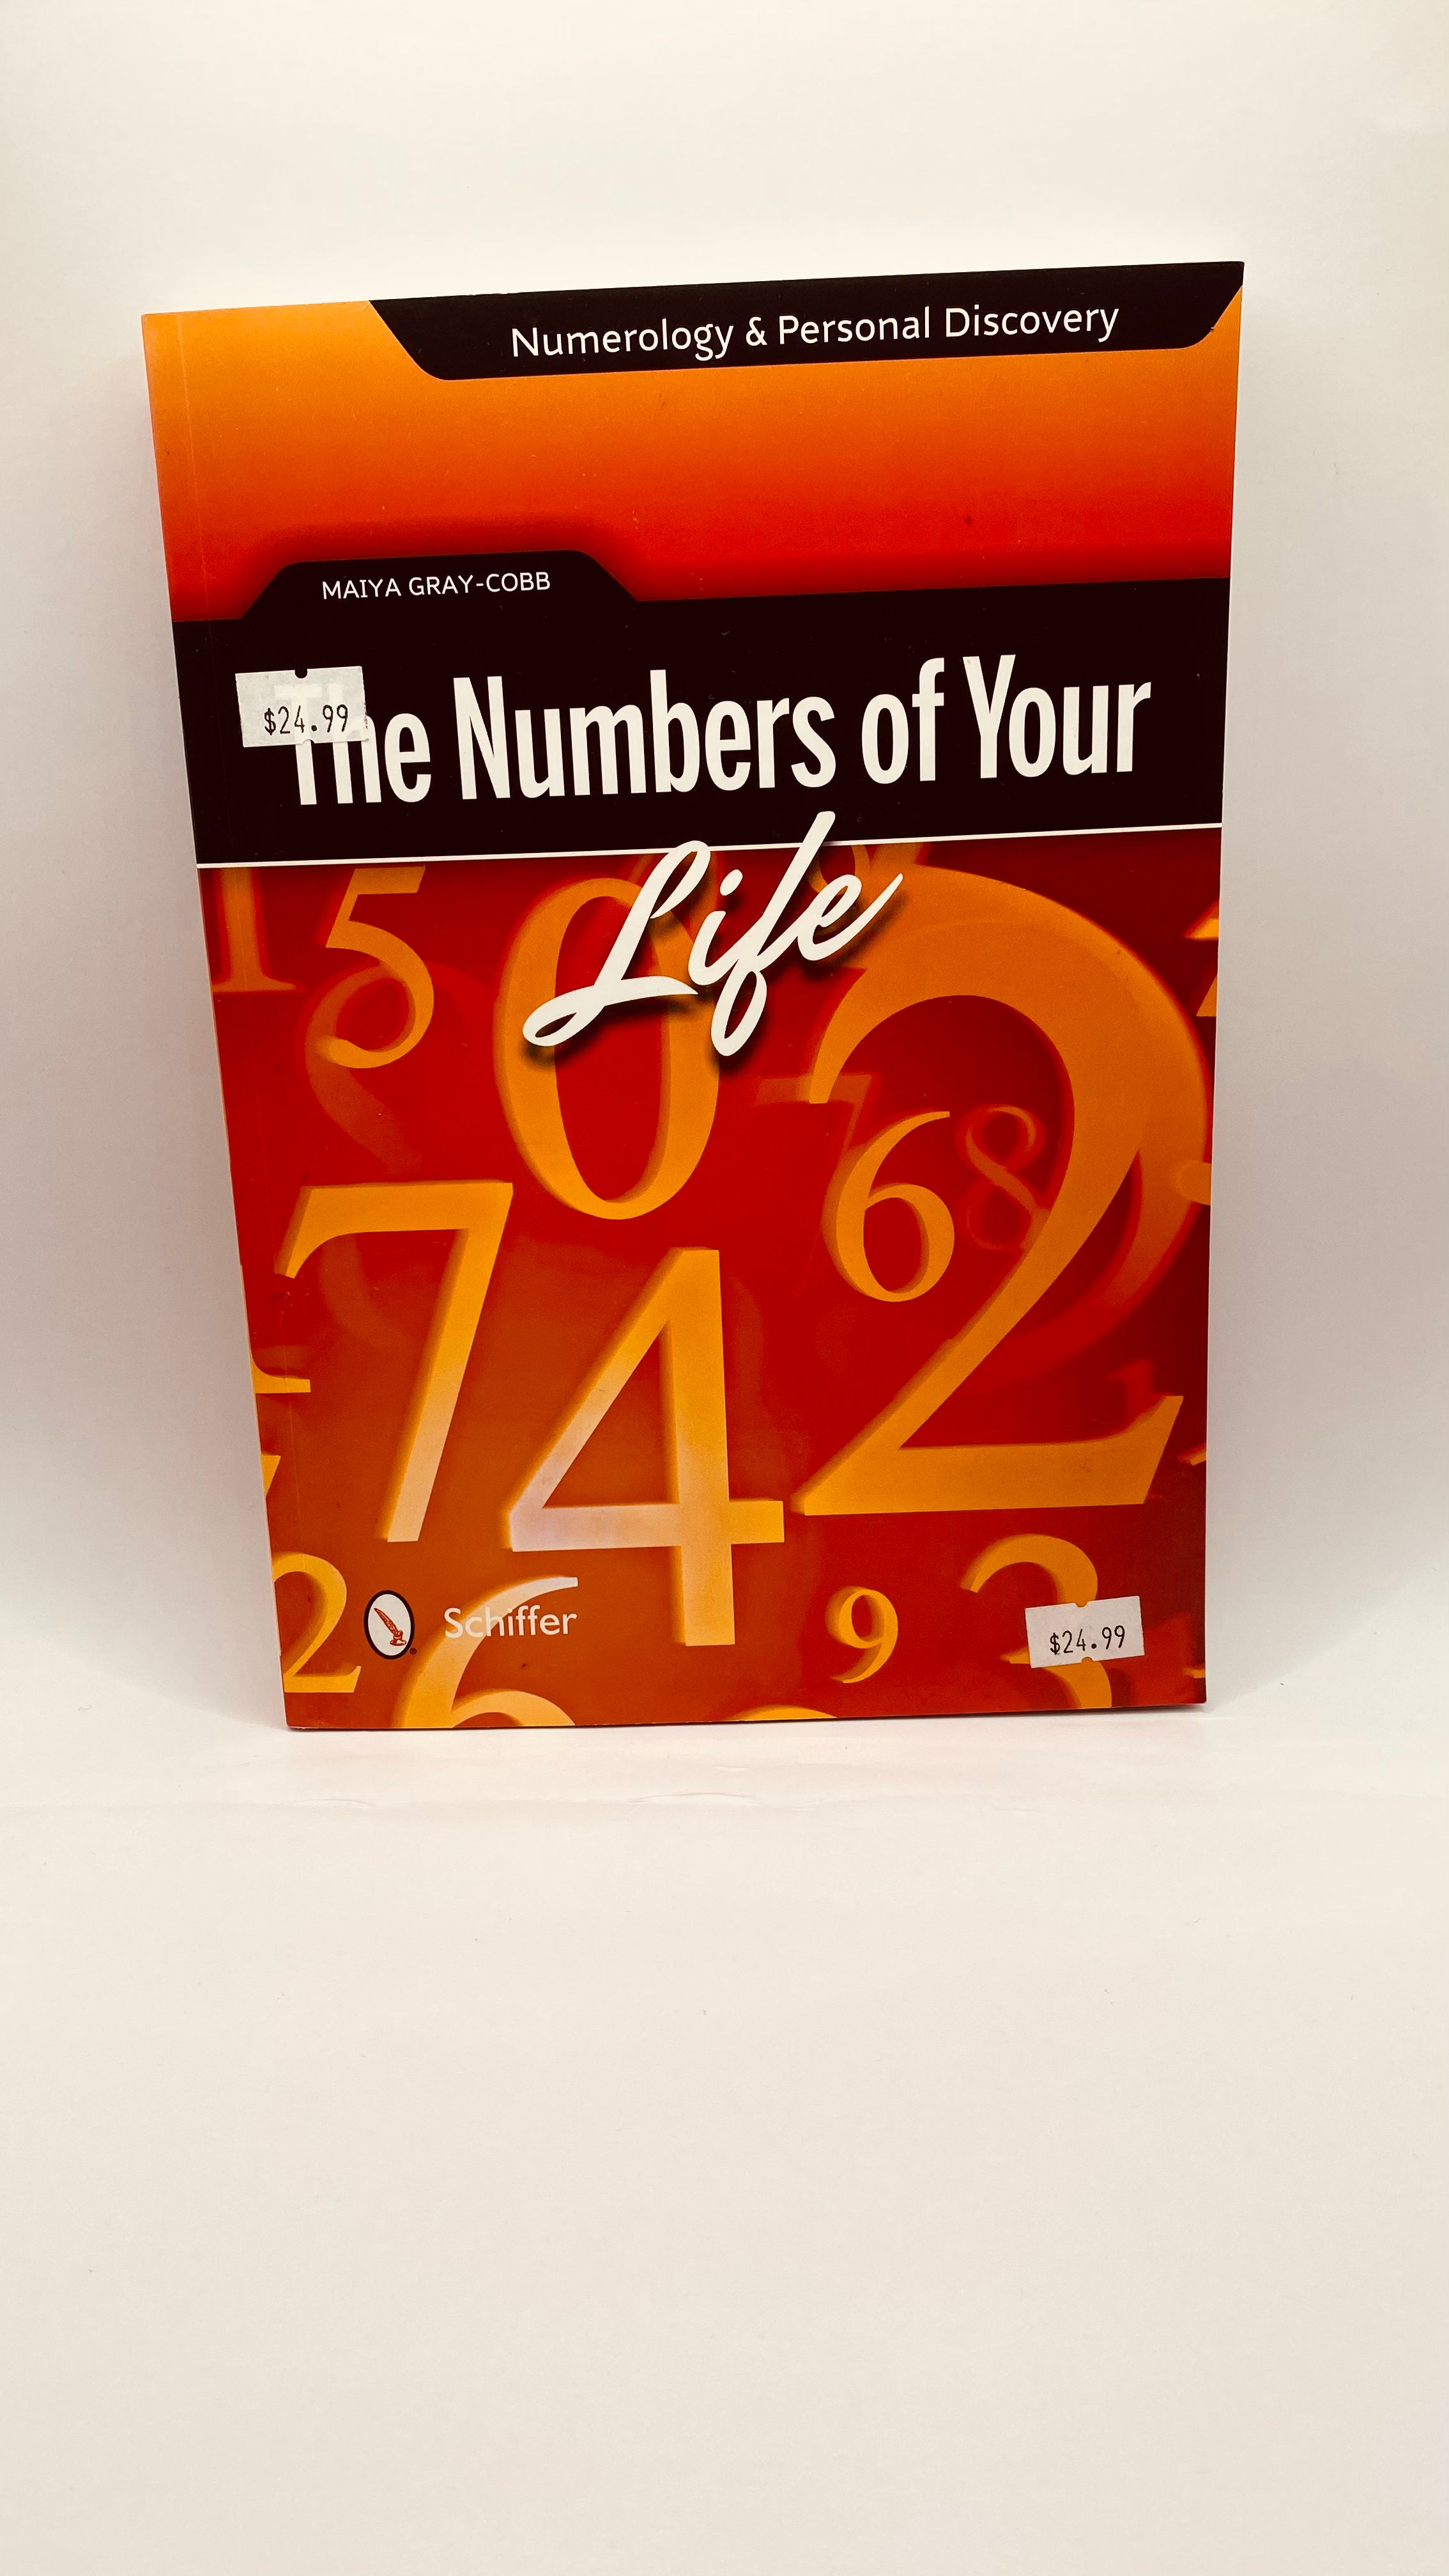 The Numbers of Your Life Book